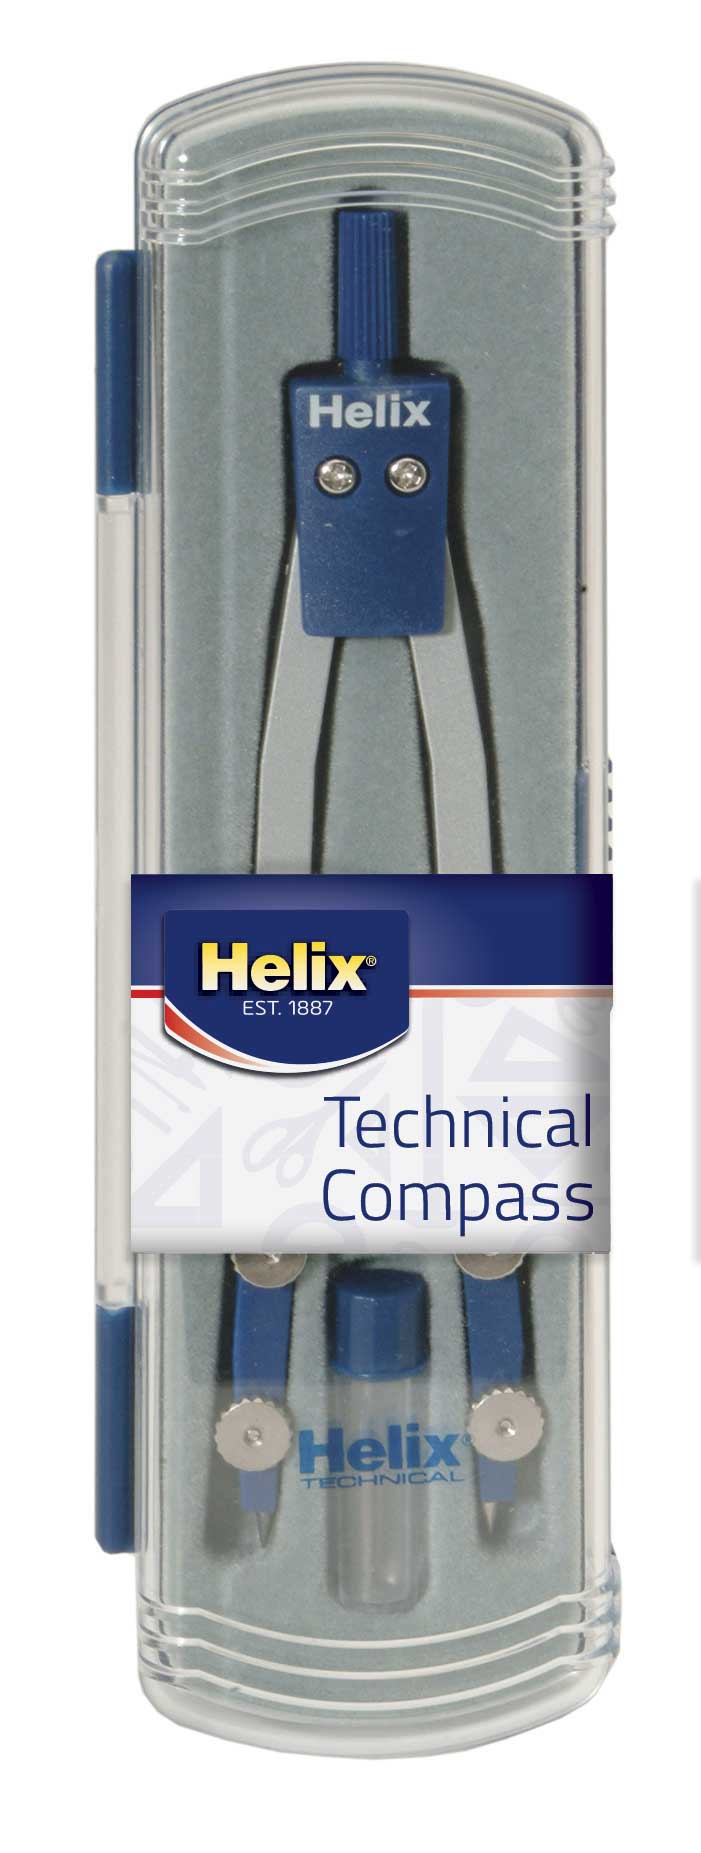 Helix Technical compass in packaging